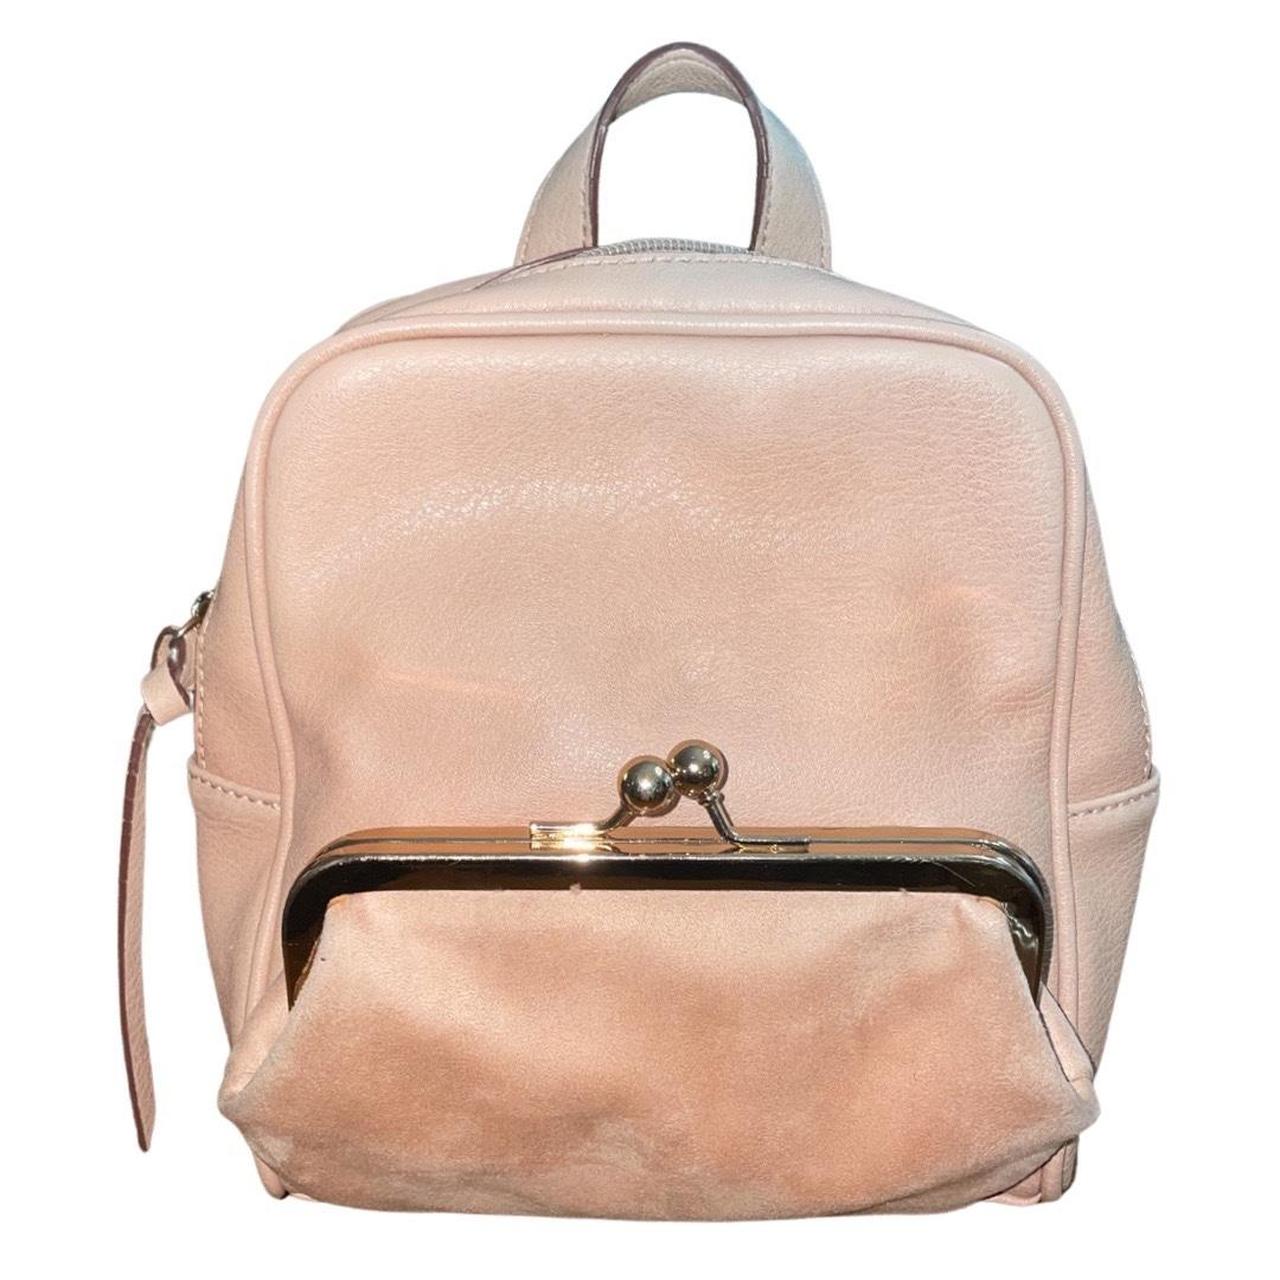 LC Lauren Conrad Pink Backpack  Pink backpack, Leather fashion